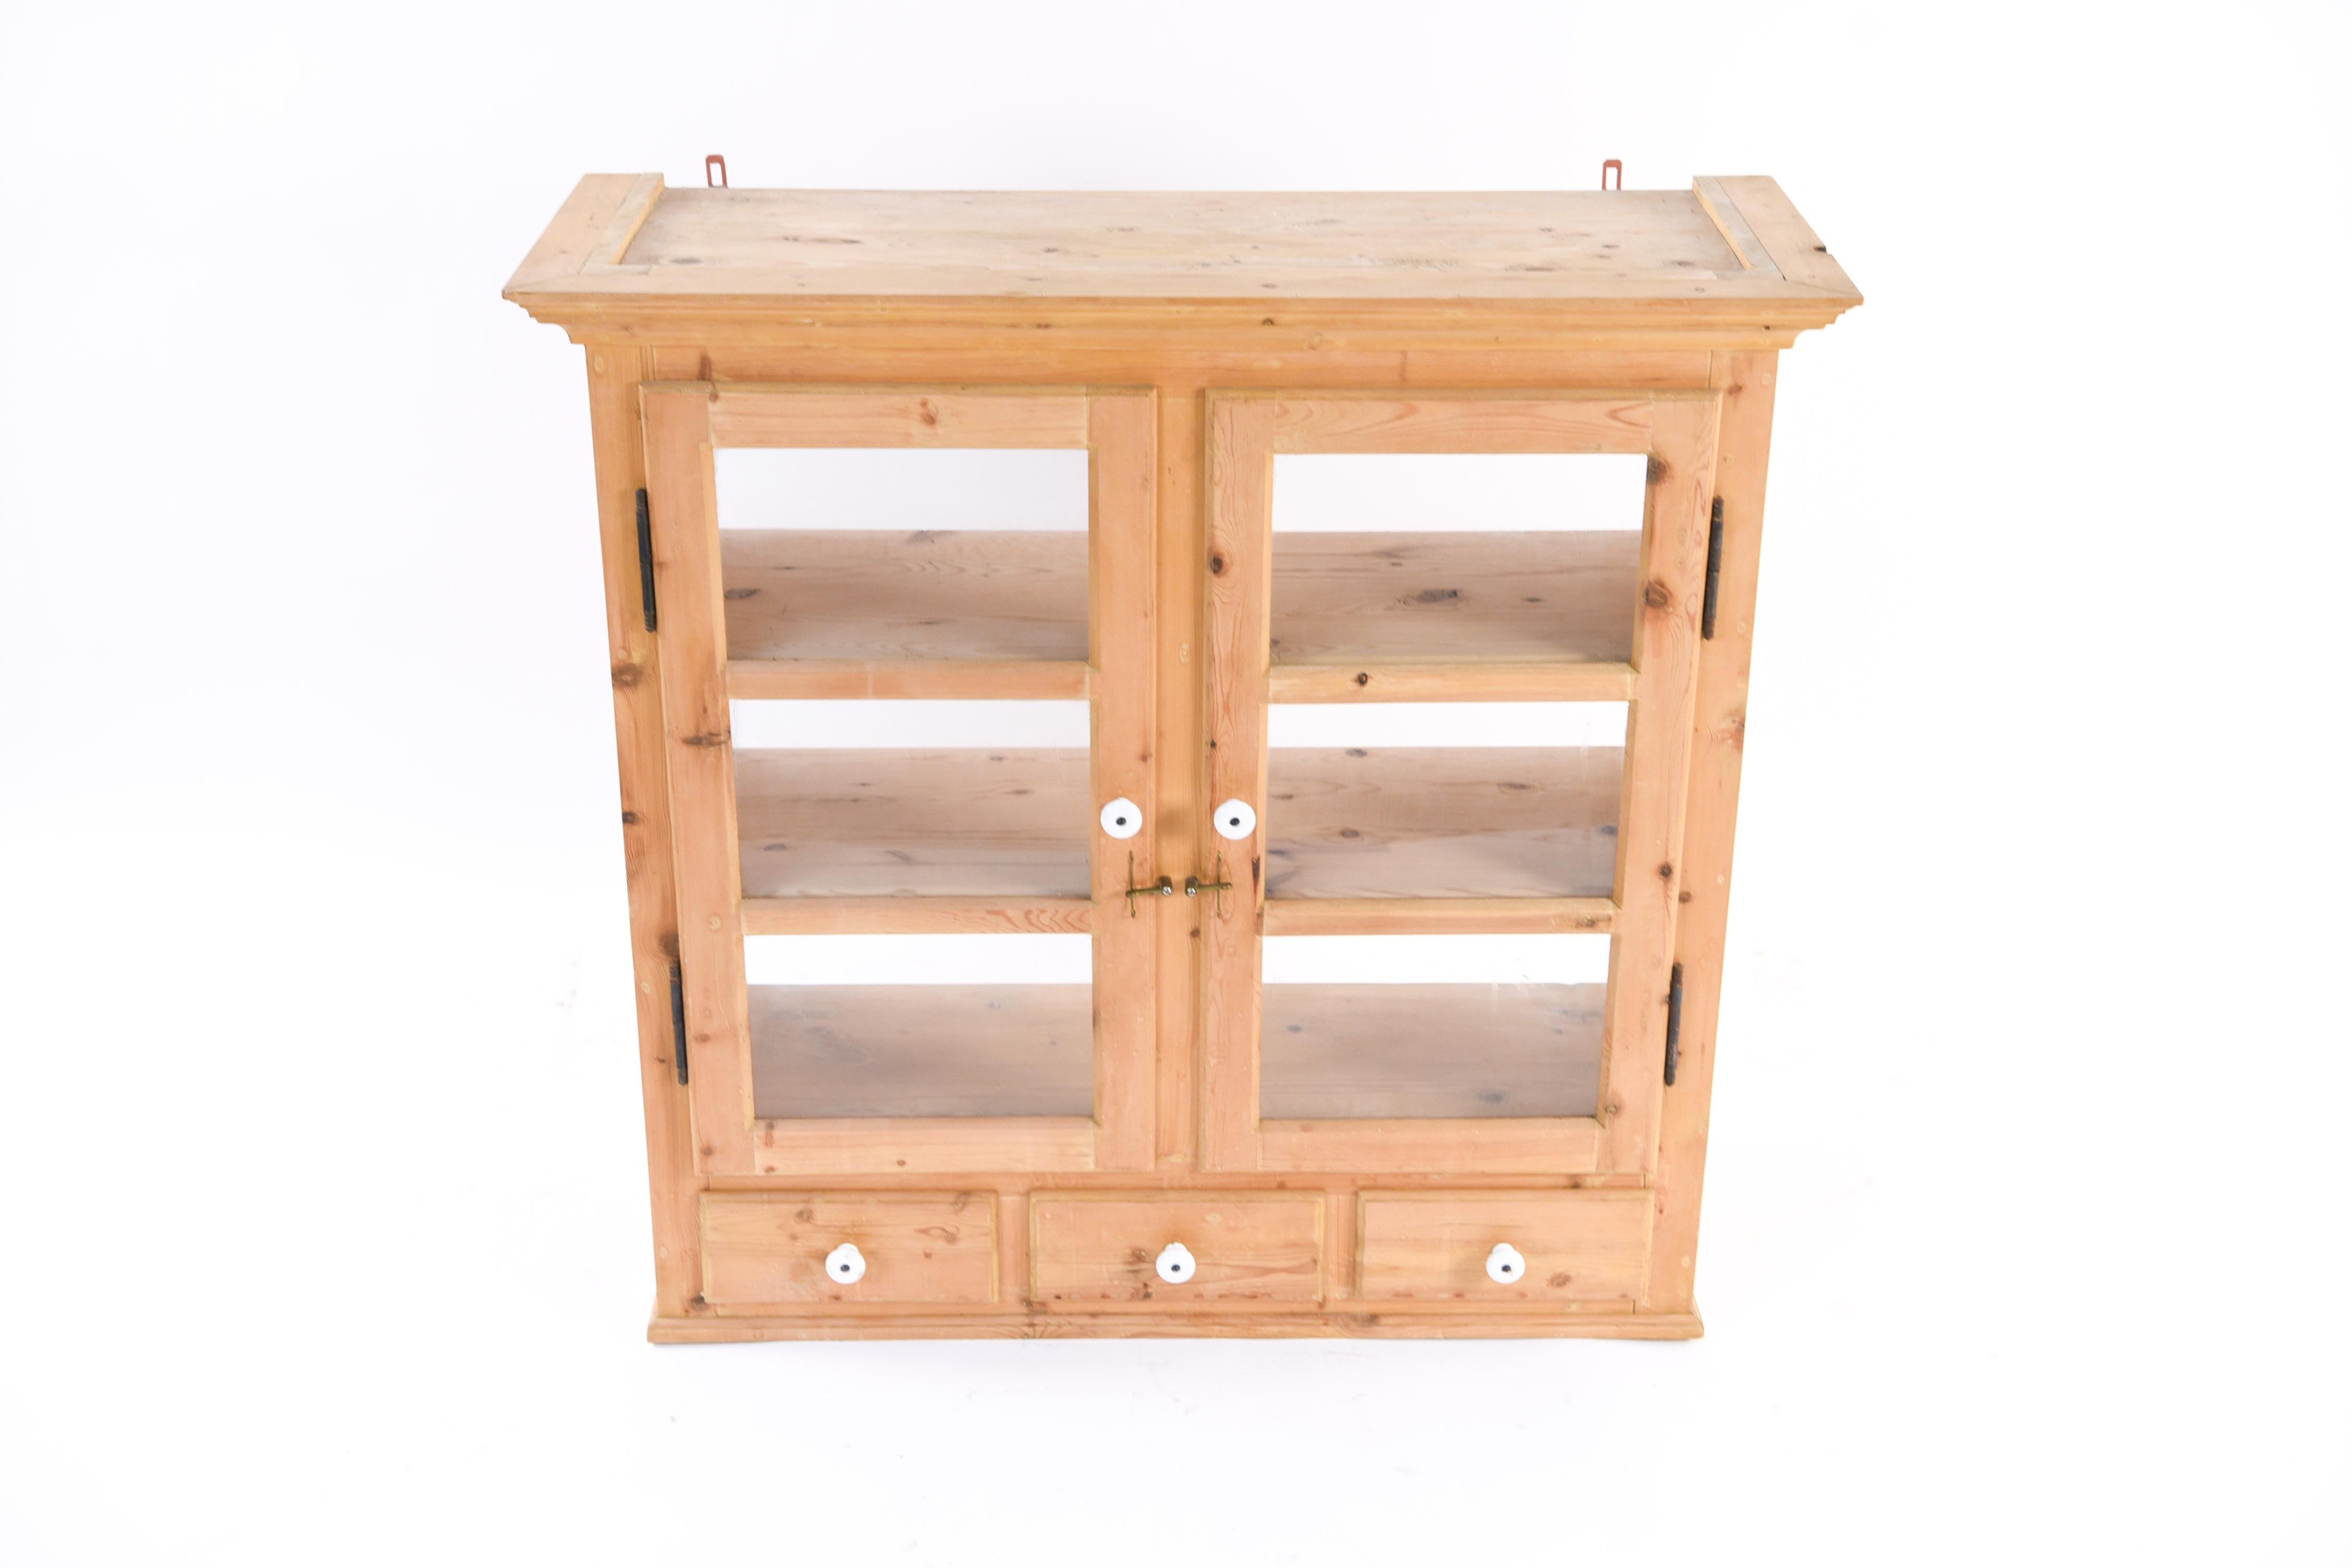 This charming Danish pine kitchen cabinet is the perfect element for the popular rustic, farmhouse look. The light pine and white handles bring a bright, fresh look to a traditional form, circa 1880s.